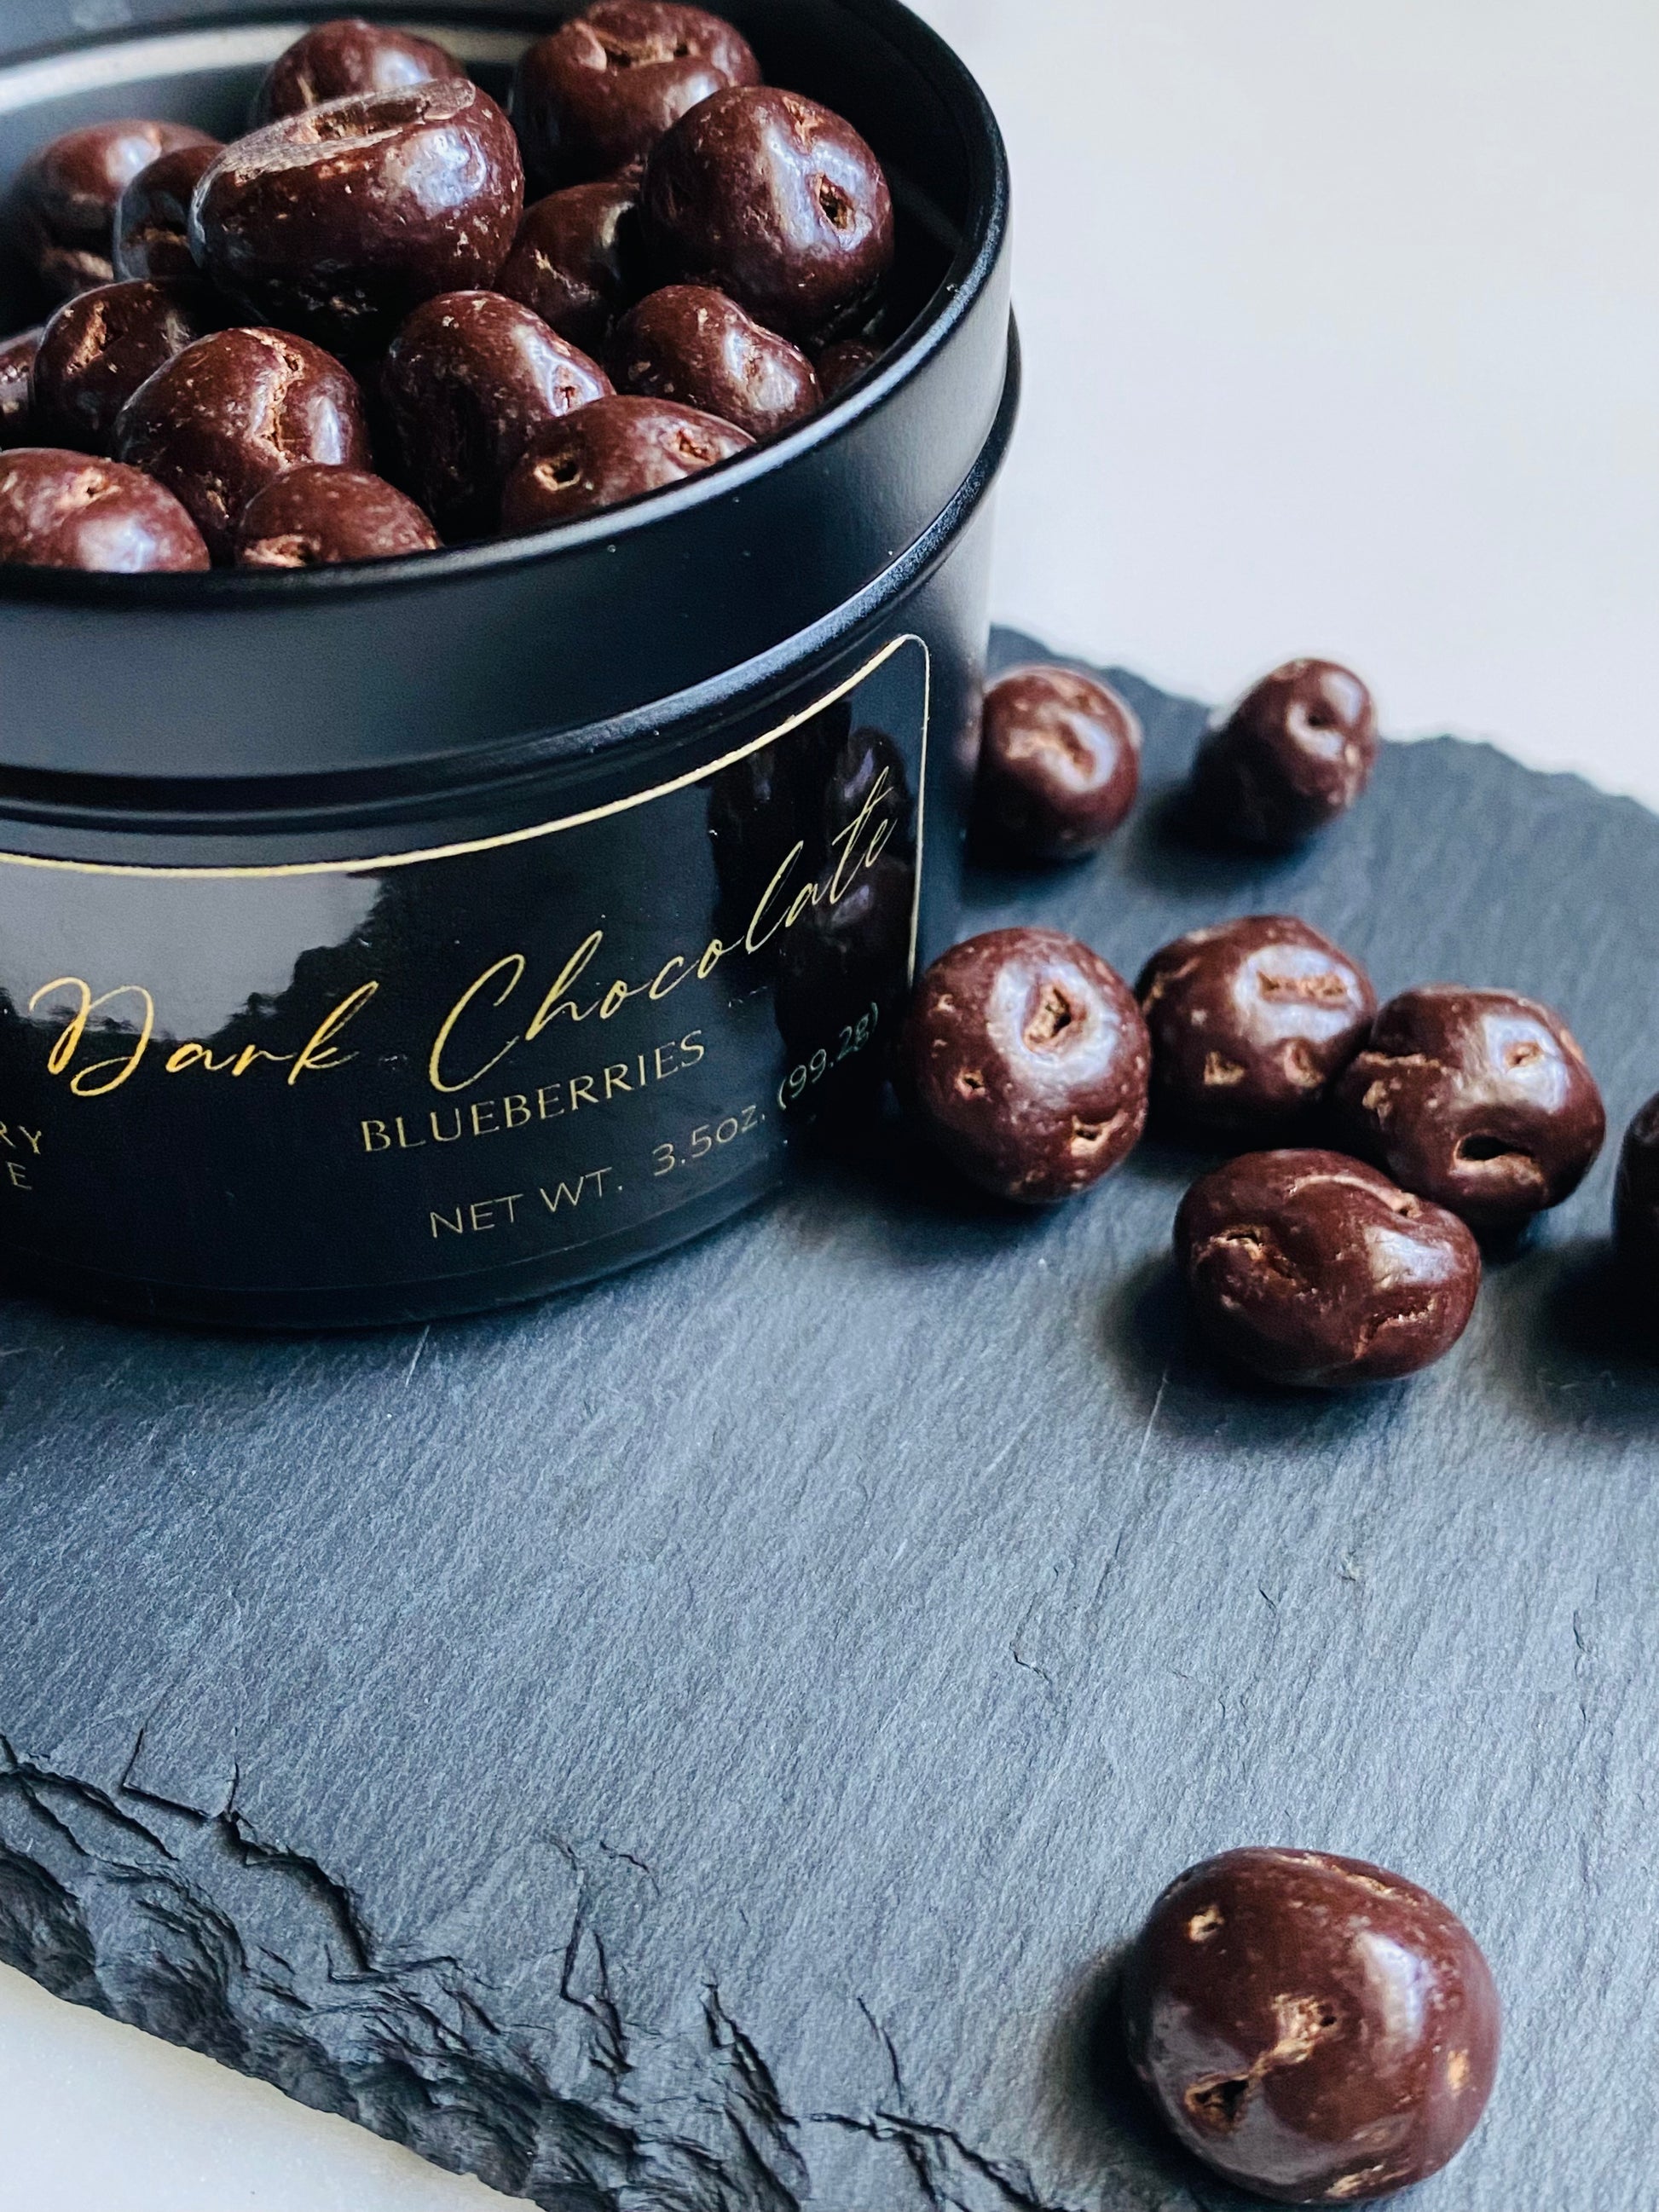 Indulge in antioxidant-rich Dark Chocolate-covered Blueberries - perfect for chocolate lovers and foodies alike.